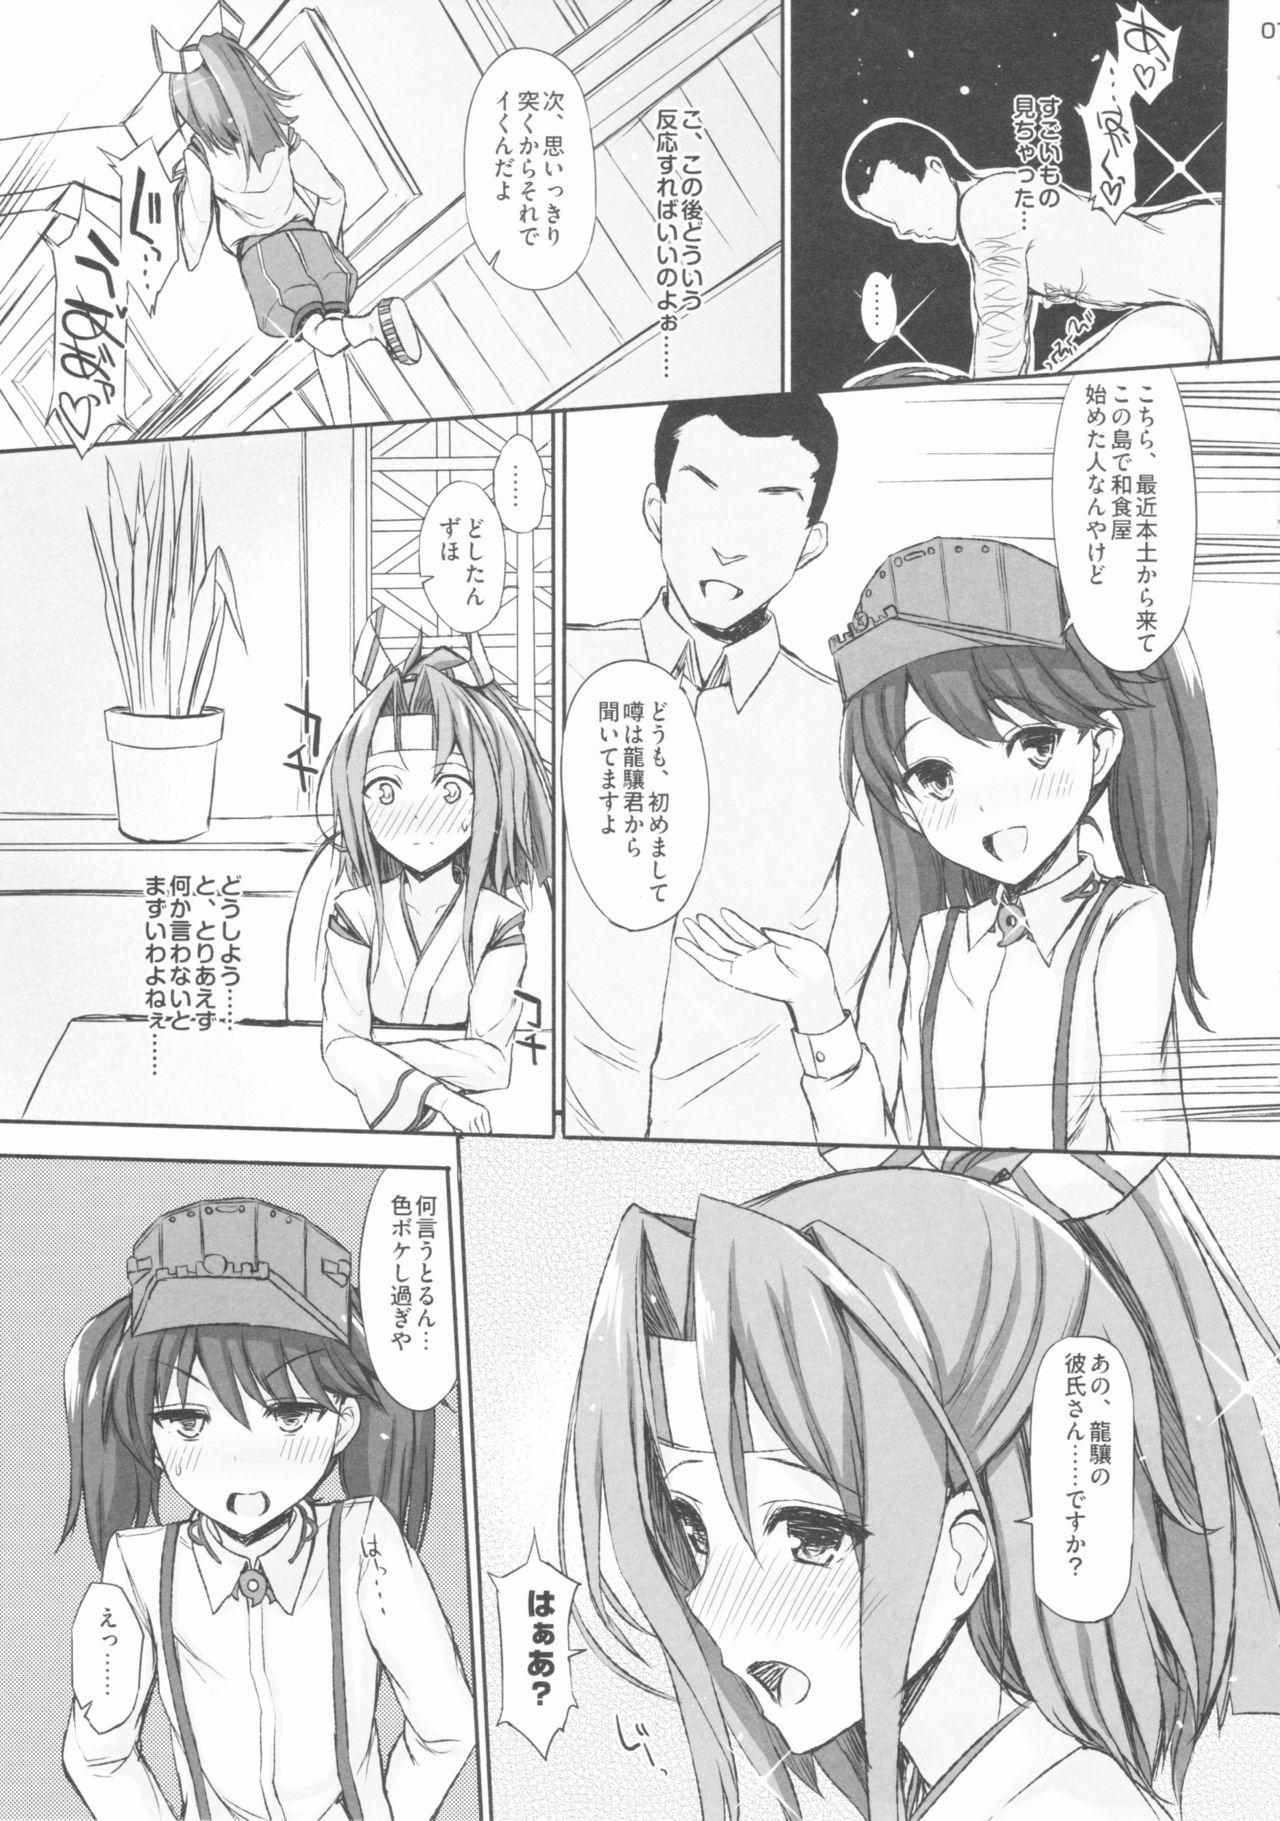 Kink AND THEN NOTHING - Kantai collection X - Page 6